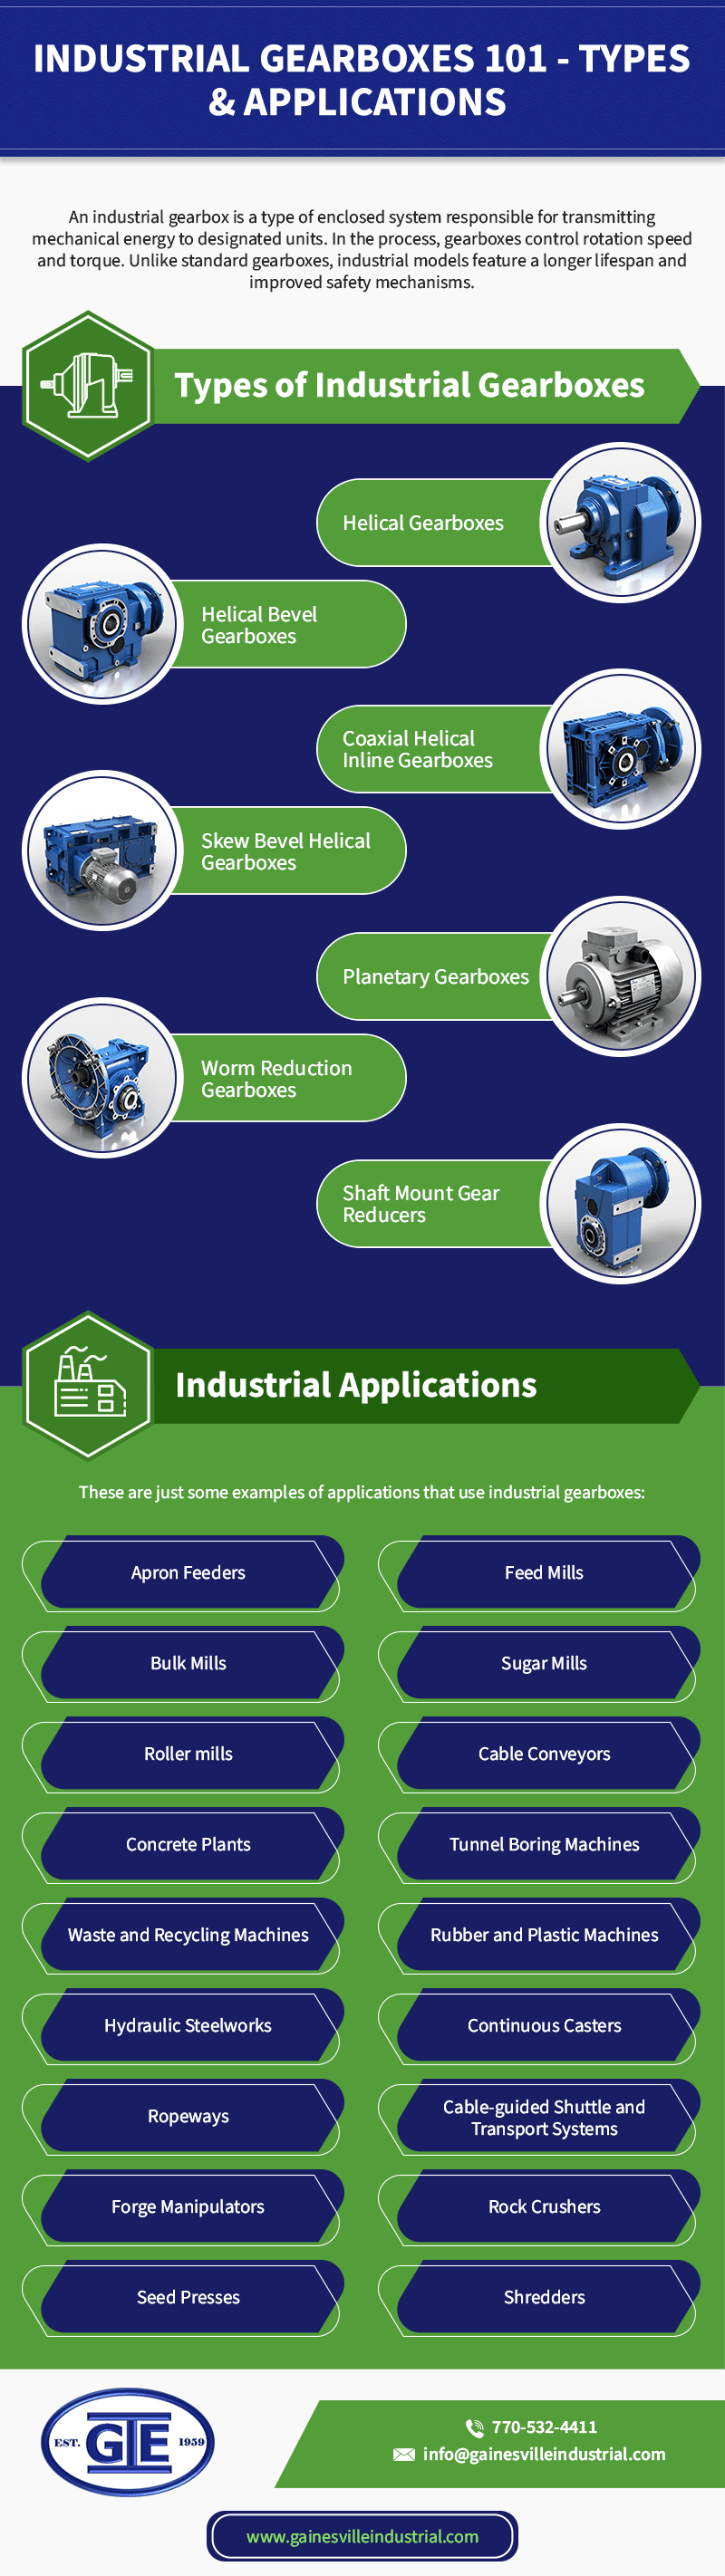 Industrial Gearboxes 101 - Types Applications